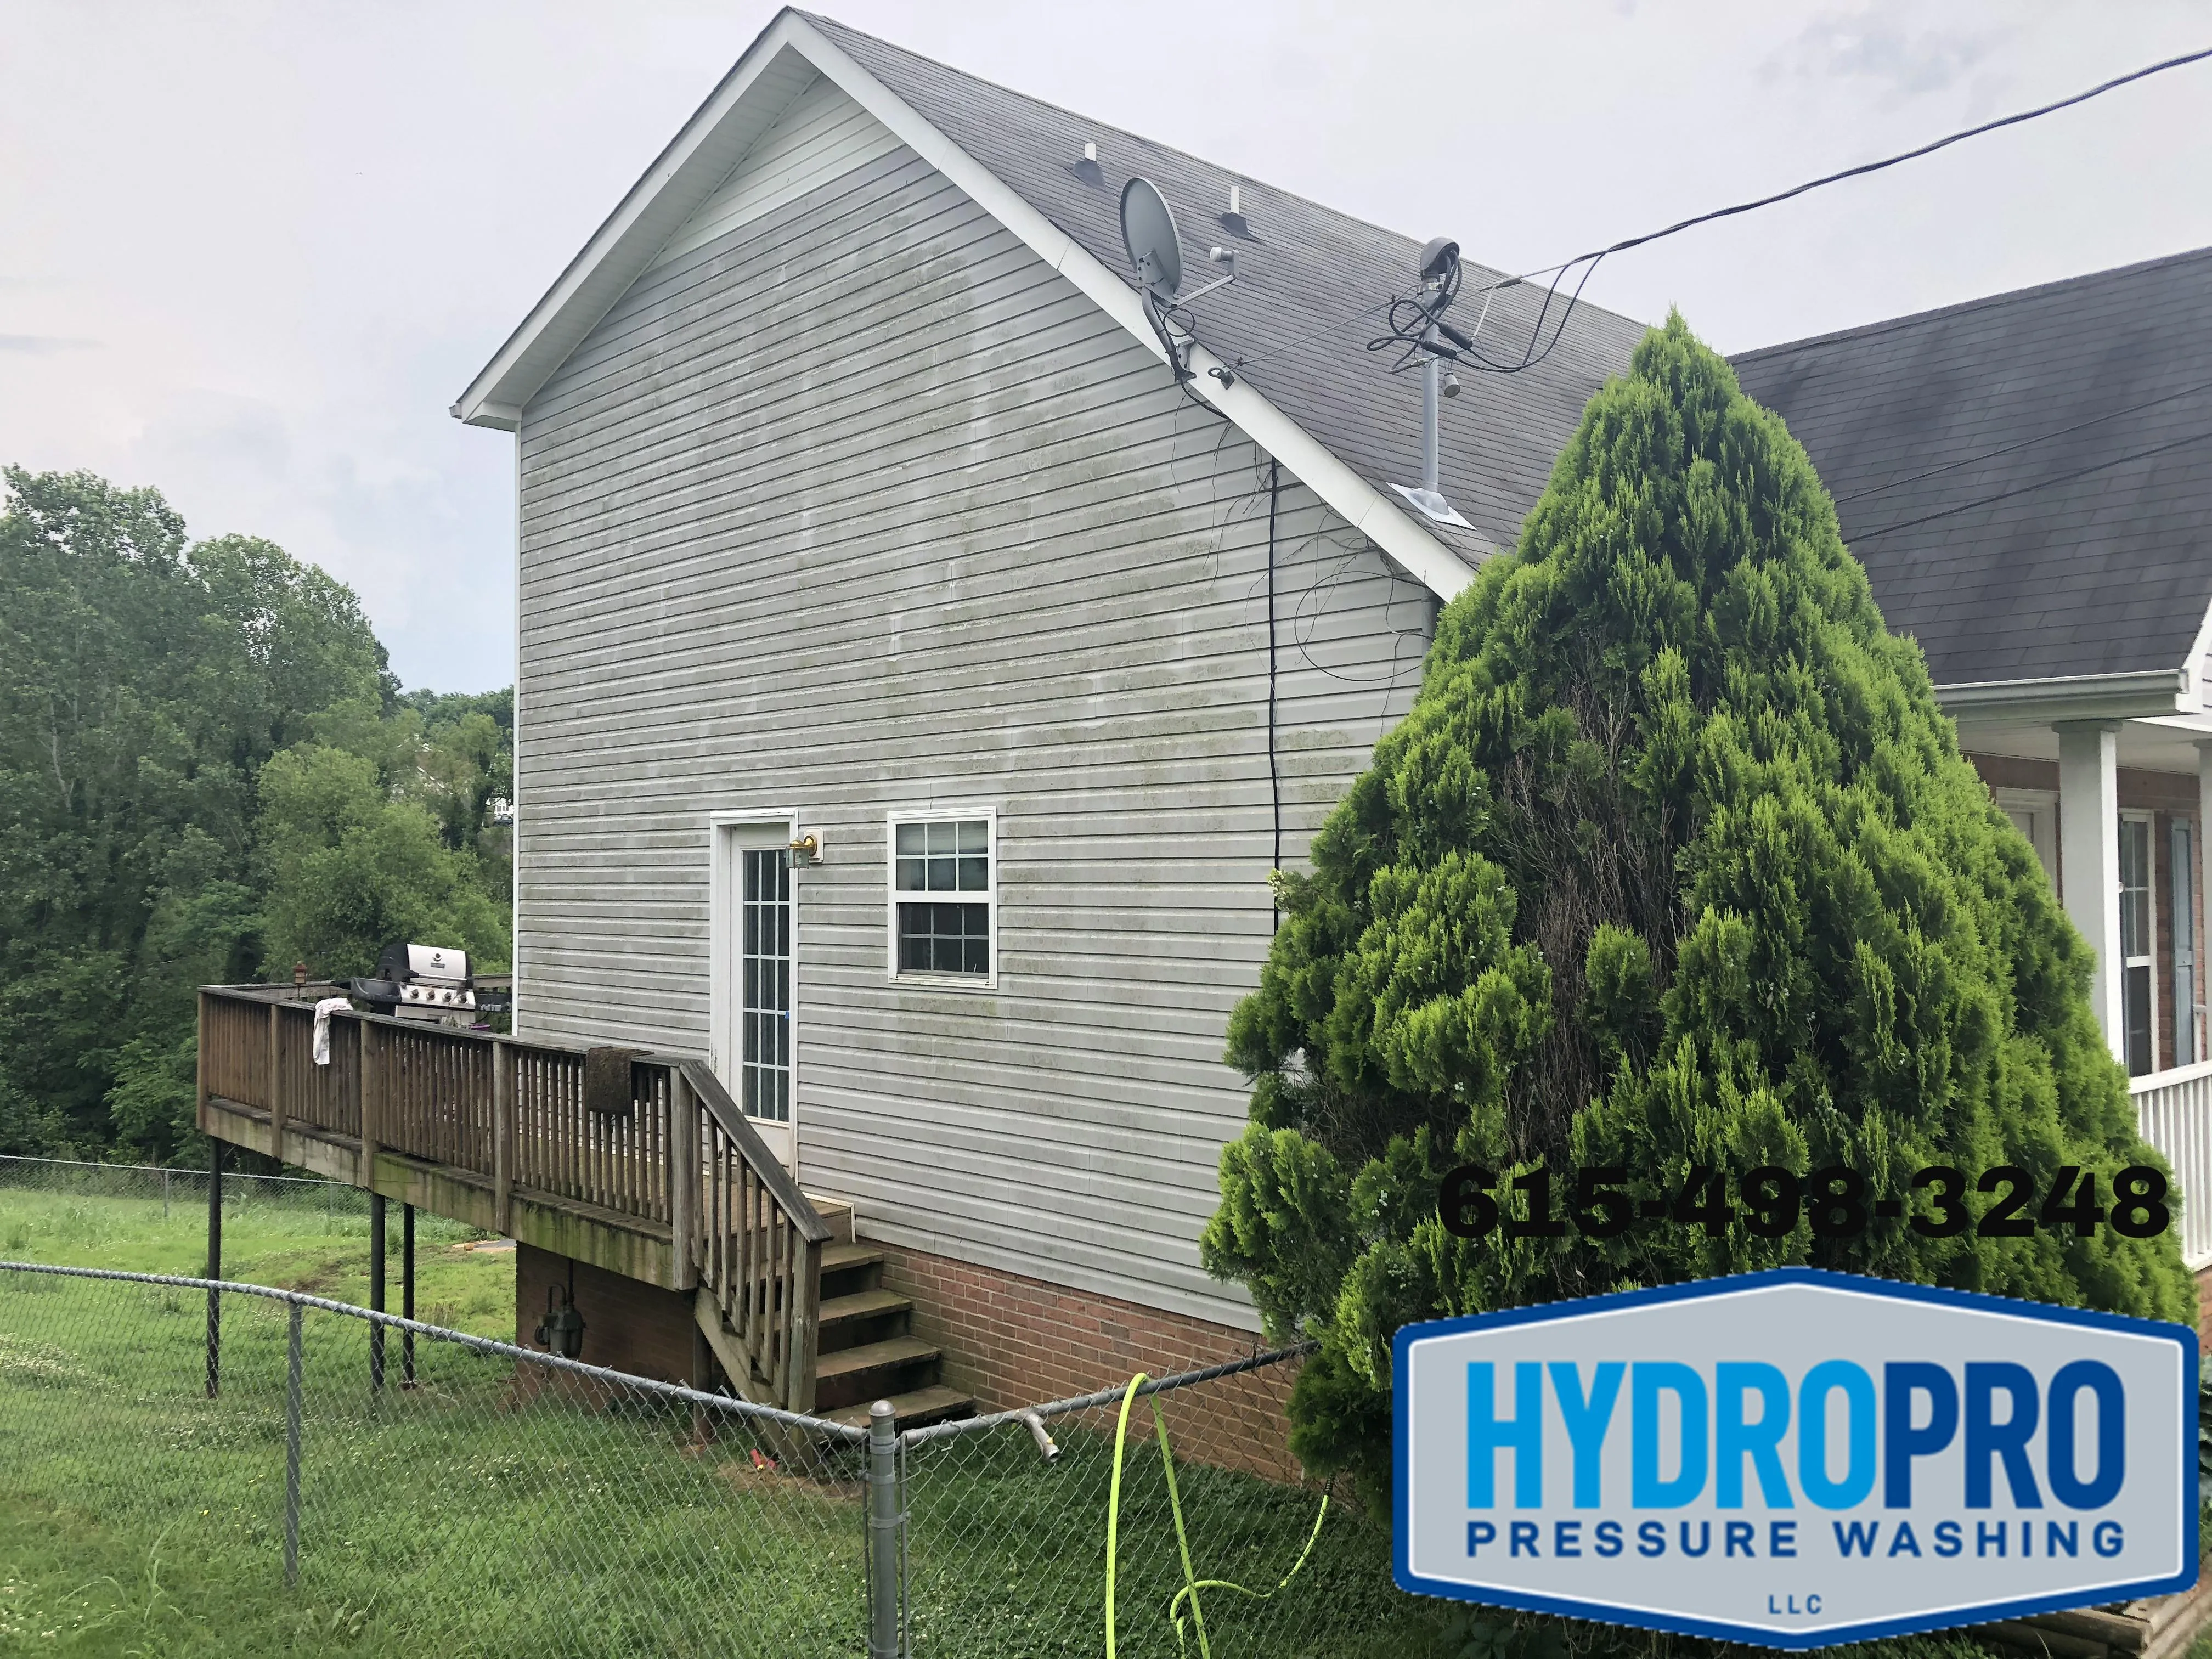 House and Roof Softwash for Oakland Power Washing in Clarksville, TN